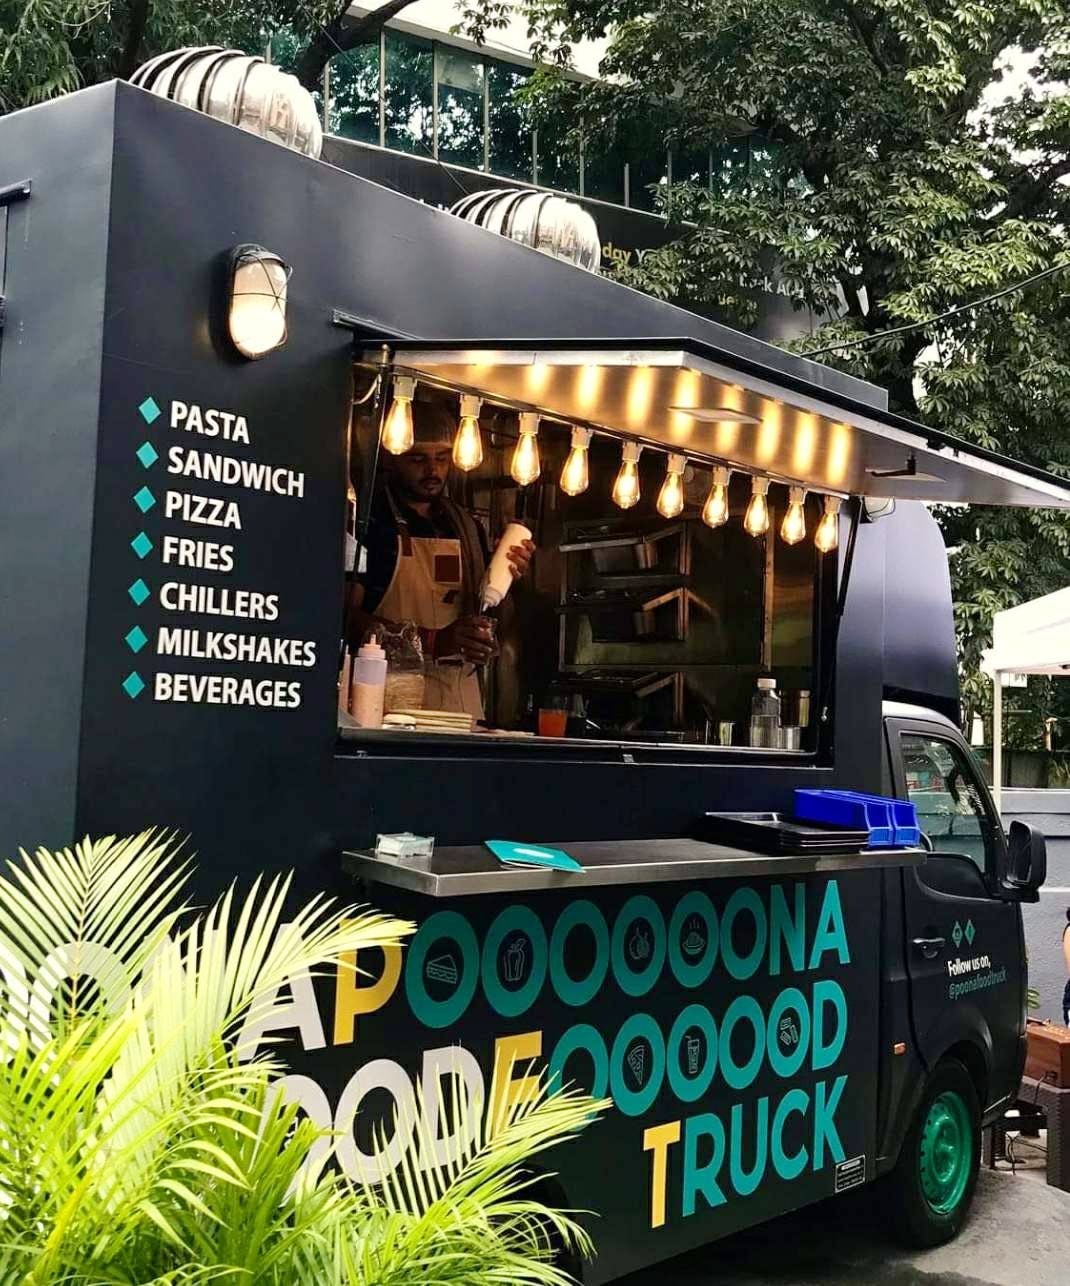 Poona Food Truck Offers Cheap Pizzas & Pastas LBB Pune